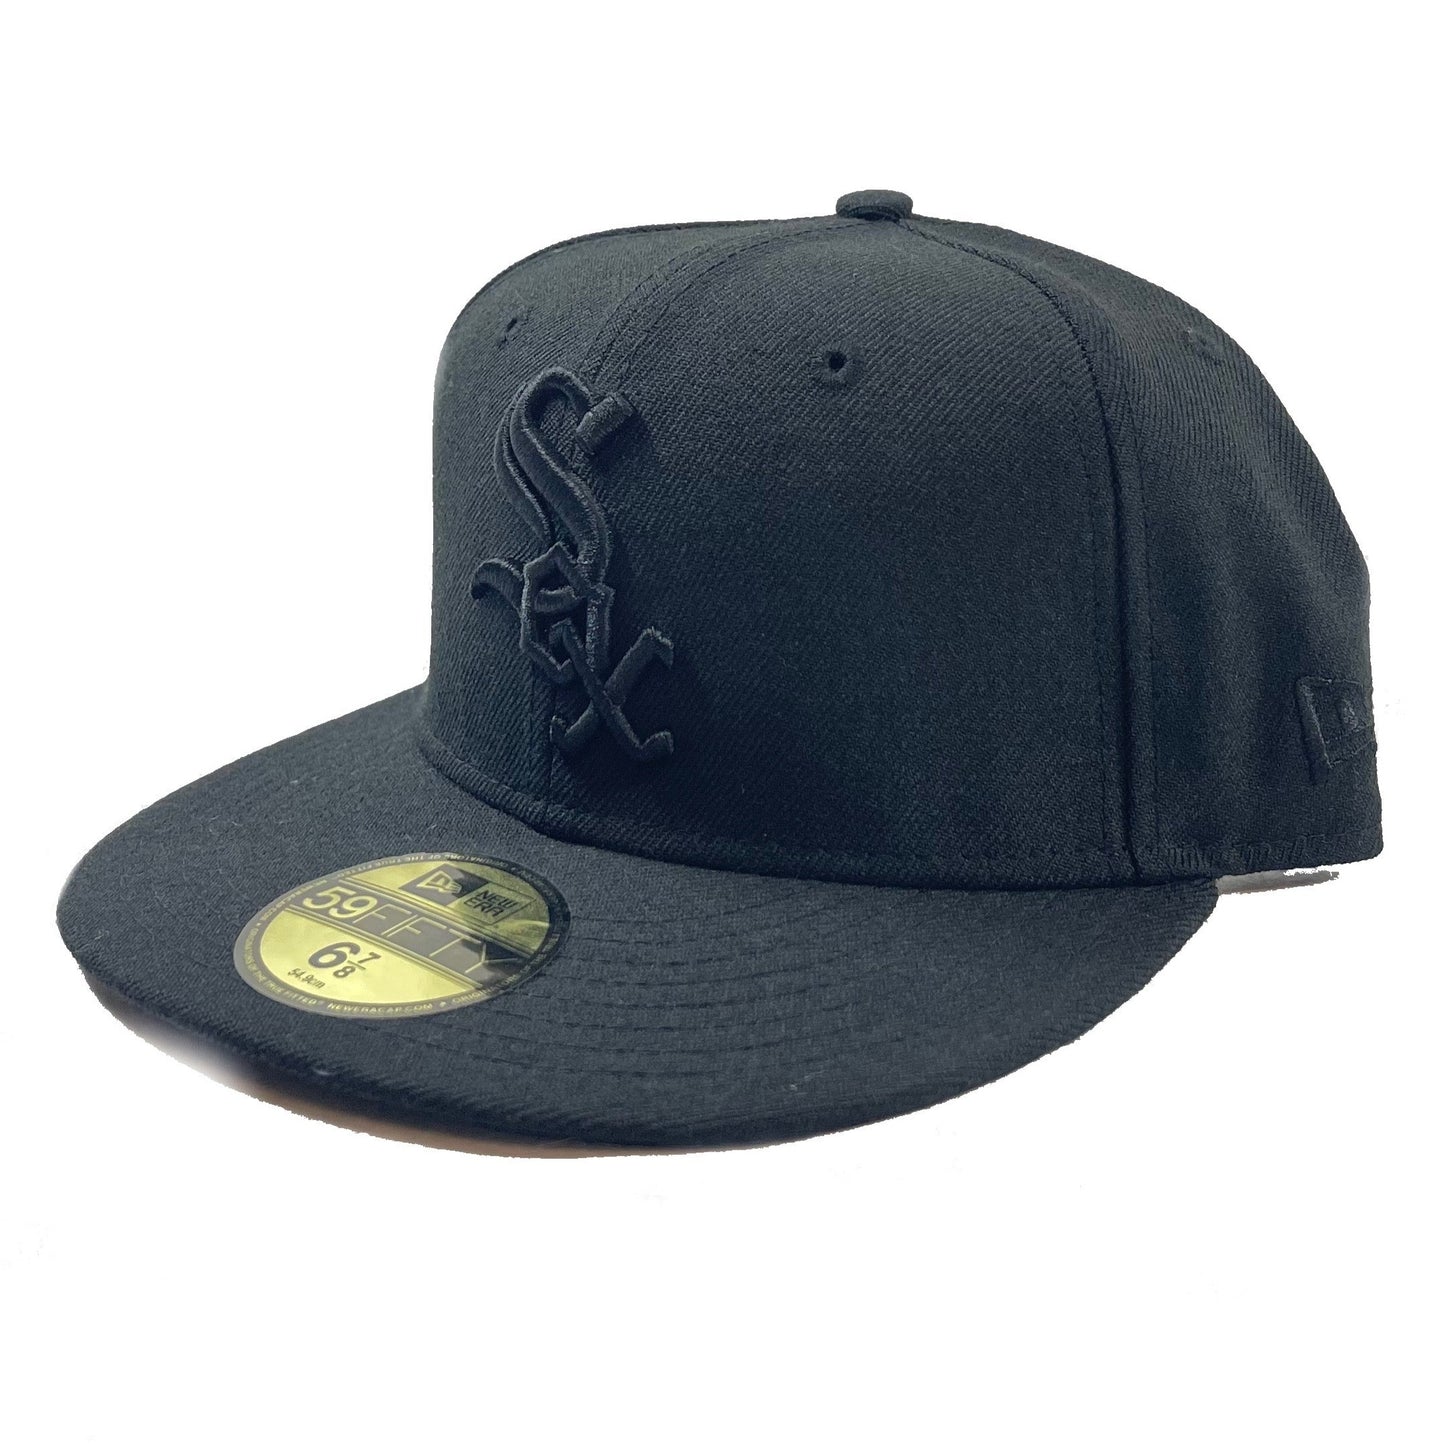 Chicago White Sox (Black) Fitted